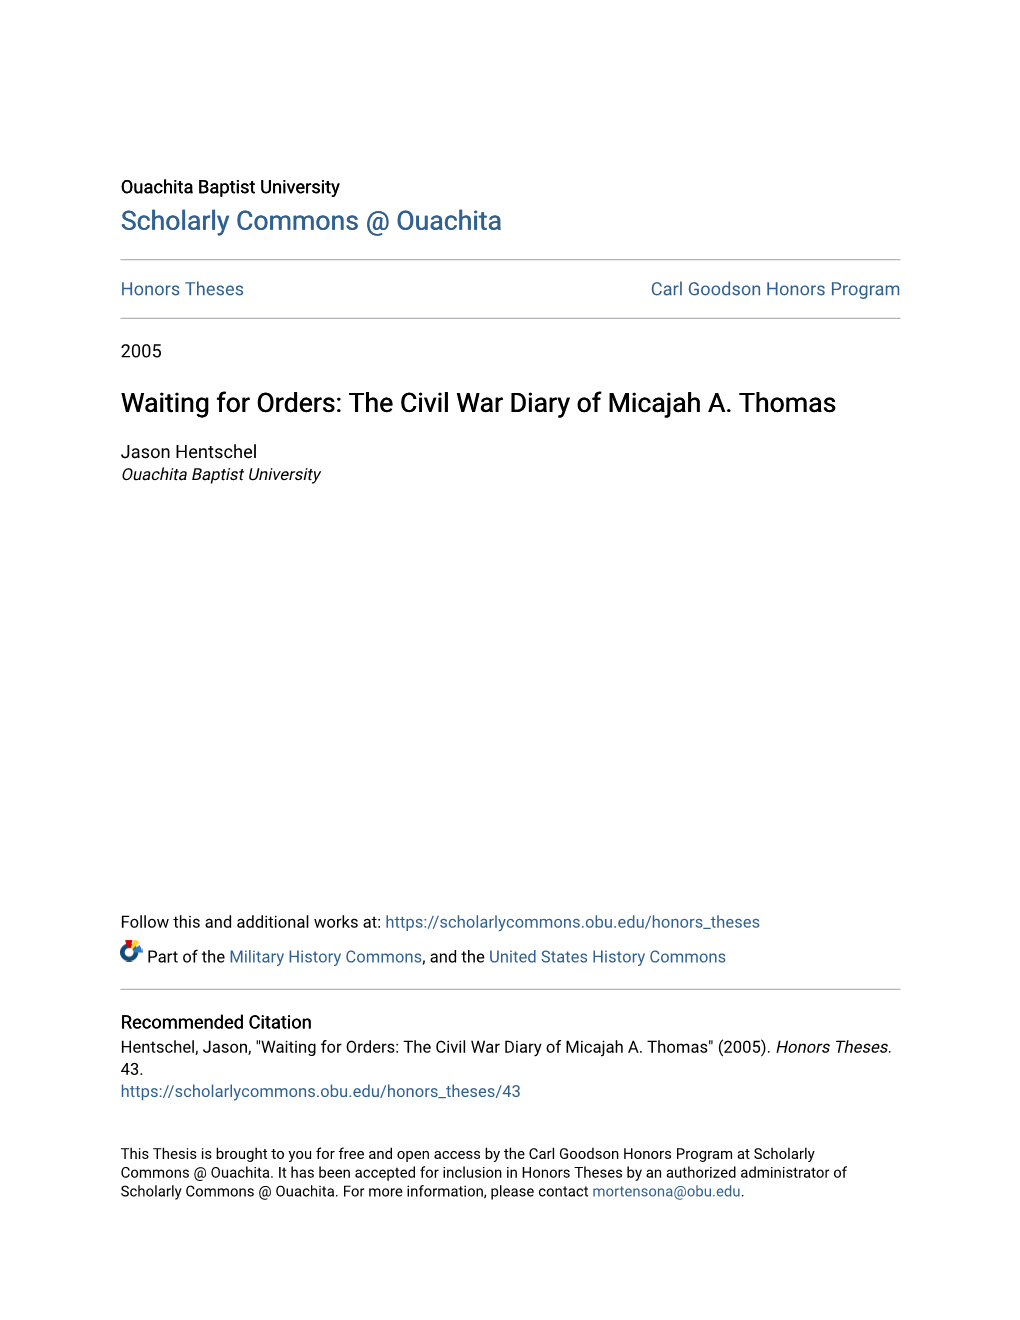 Waiting for Orders: the Civil War Diary of Micajah A. Thomas